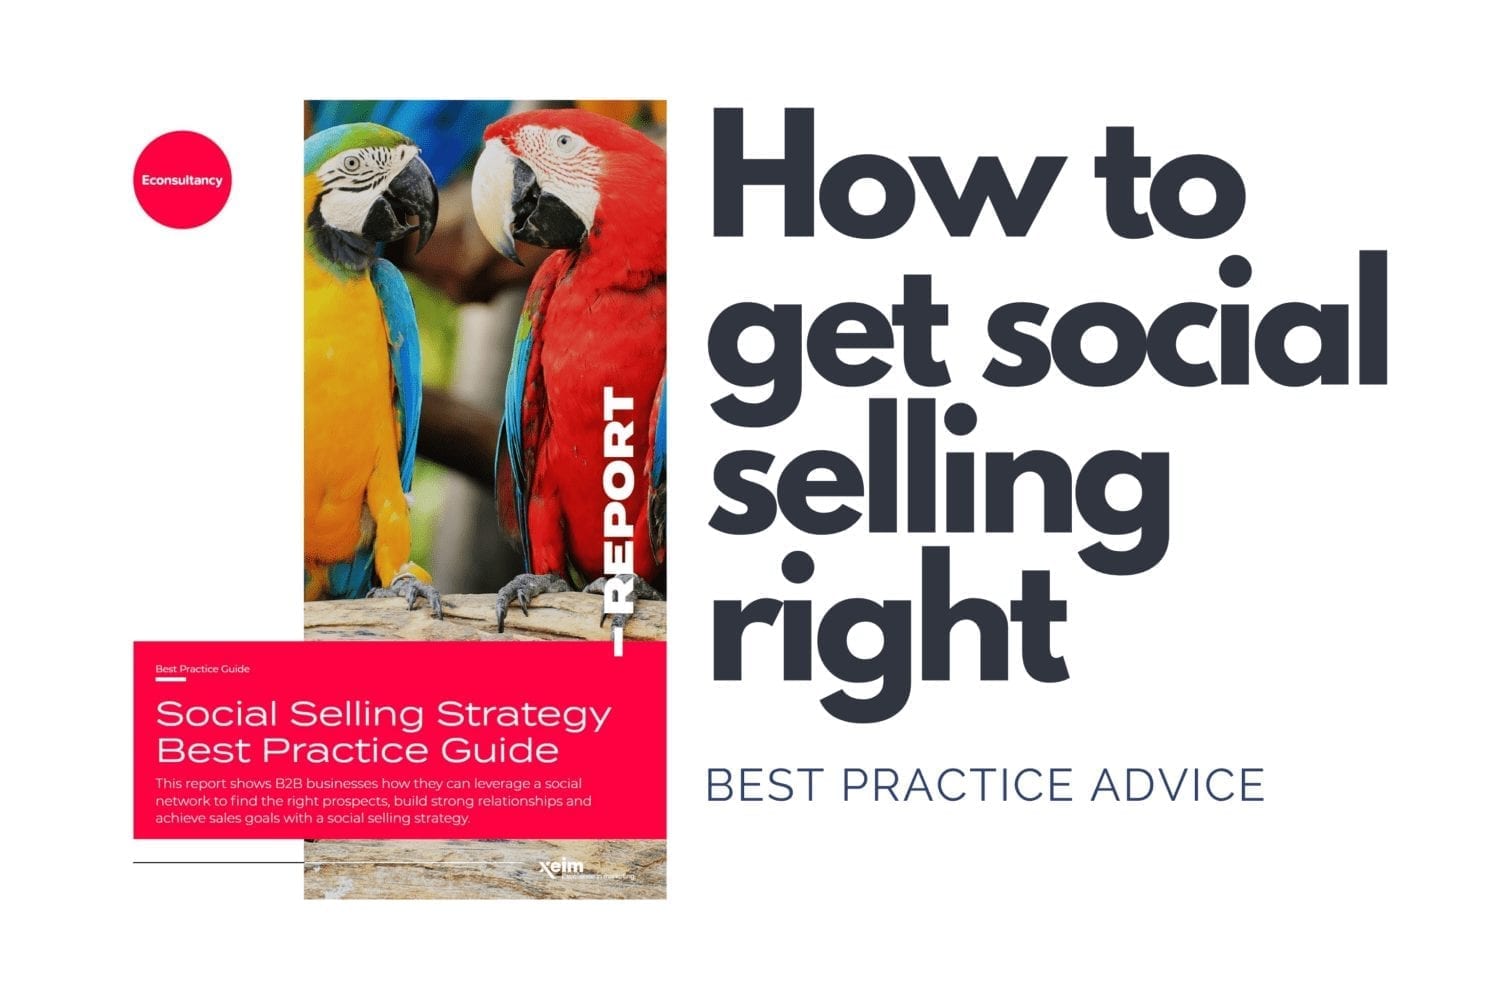 eConsultancy social selling best practice guide with Your Allies